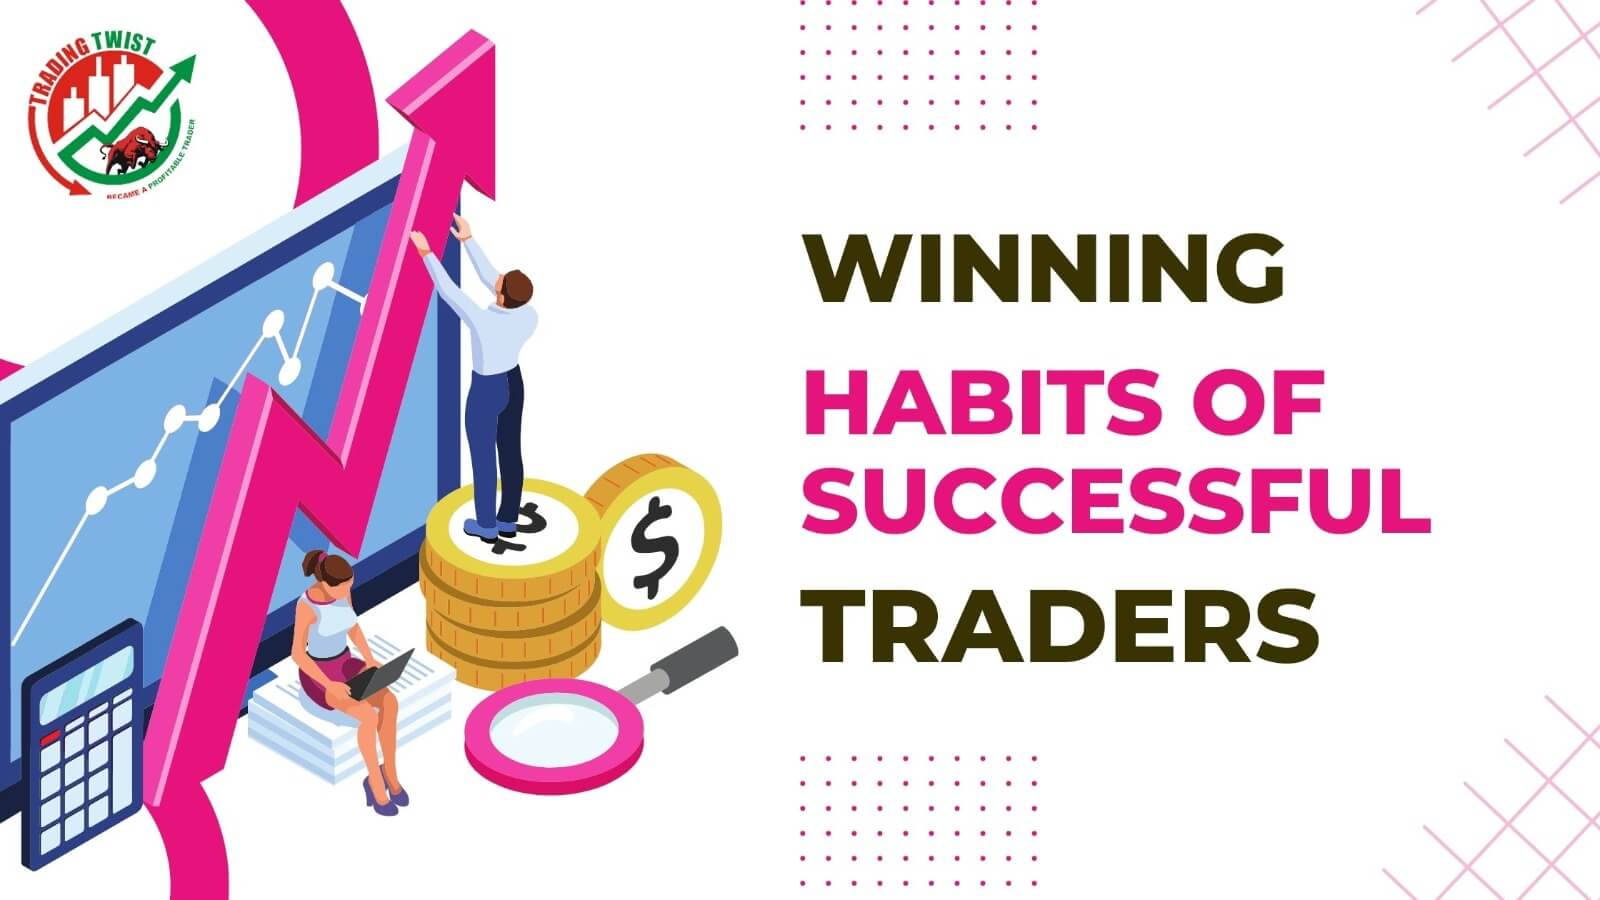 10 Unknown Winning Habits of Successful Traders